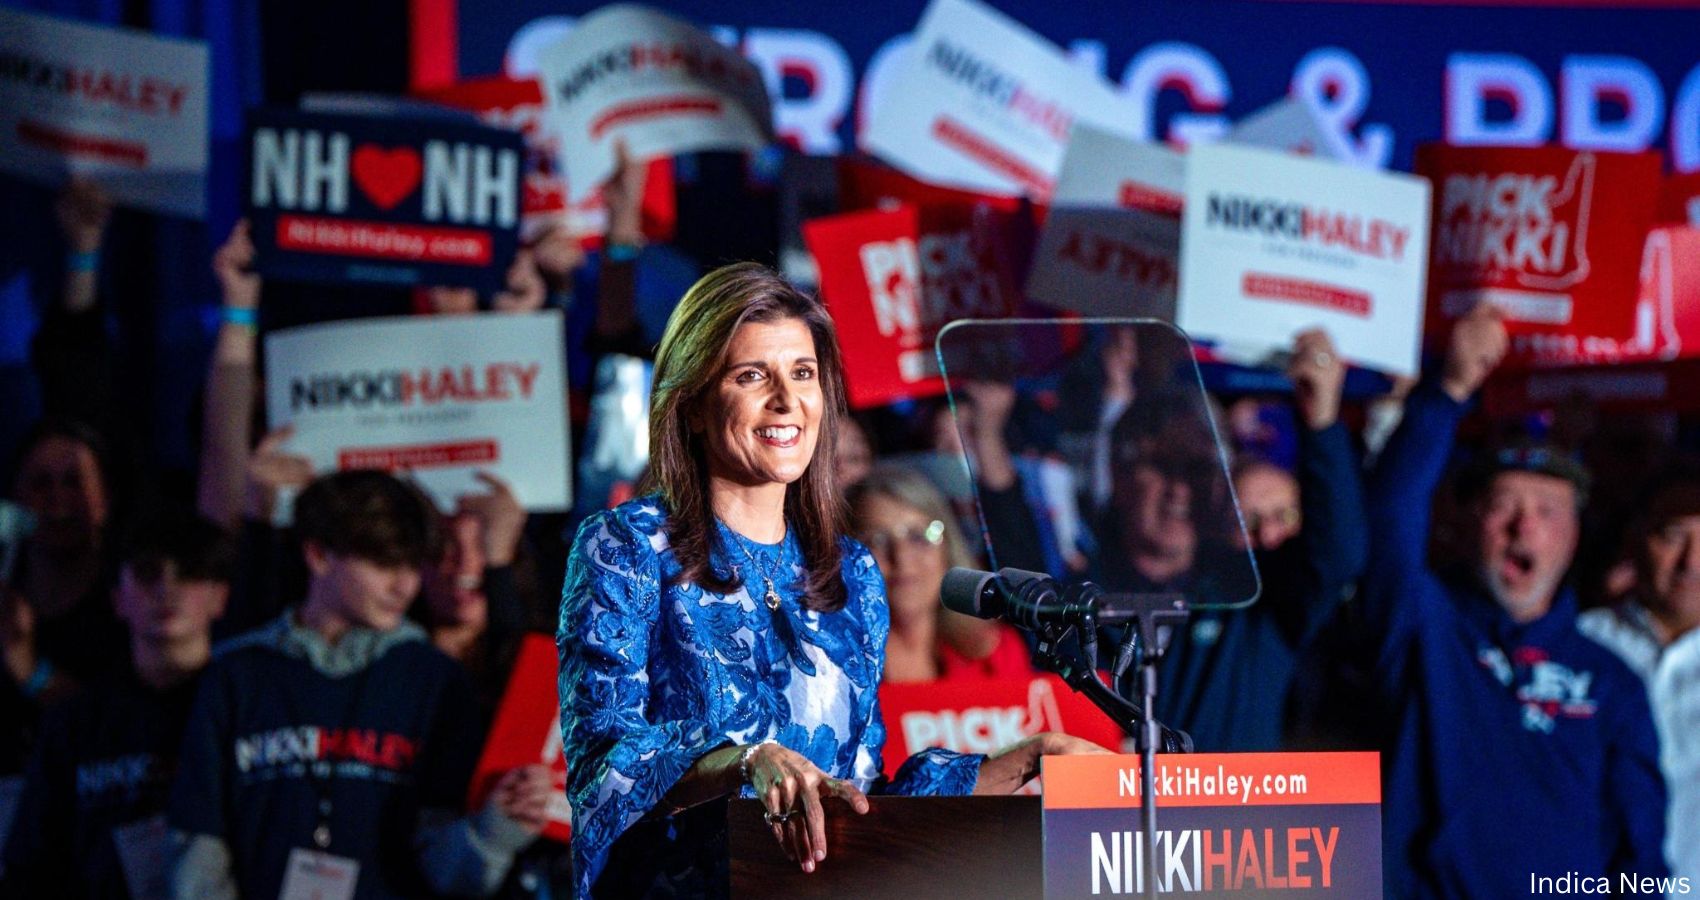 Feature and Cover “She’s resilient” Indian Americans react to Nikki Haley’s campaign after Iowa and New Hampshire